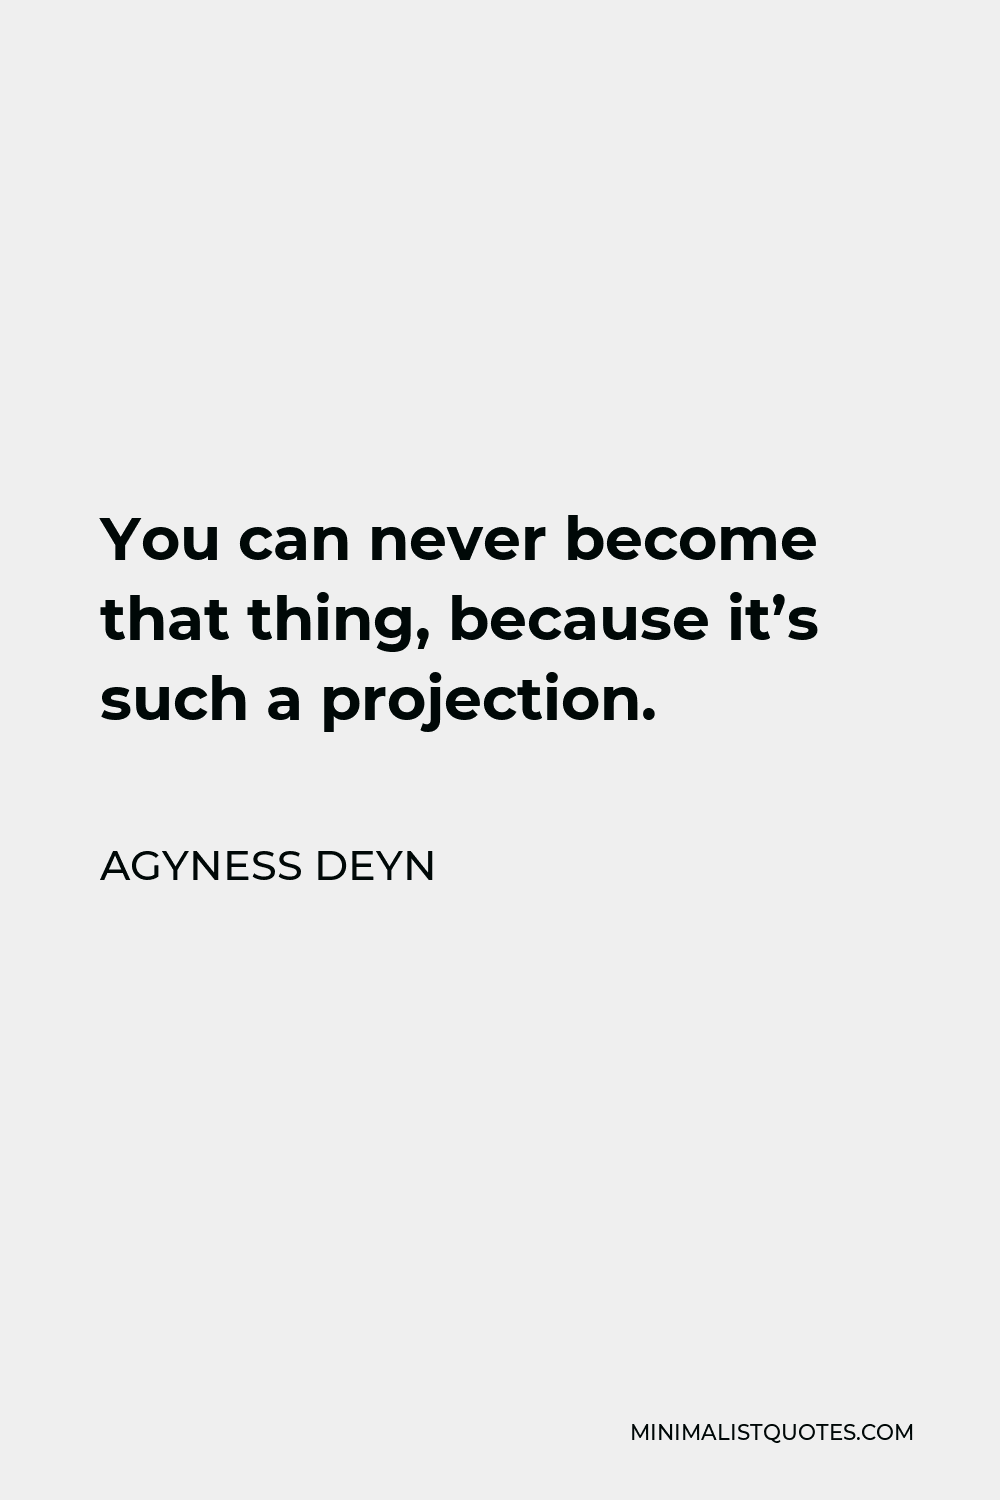 Agyness Deyn Quote - You can never become that thing, because it’s such a projection.